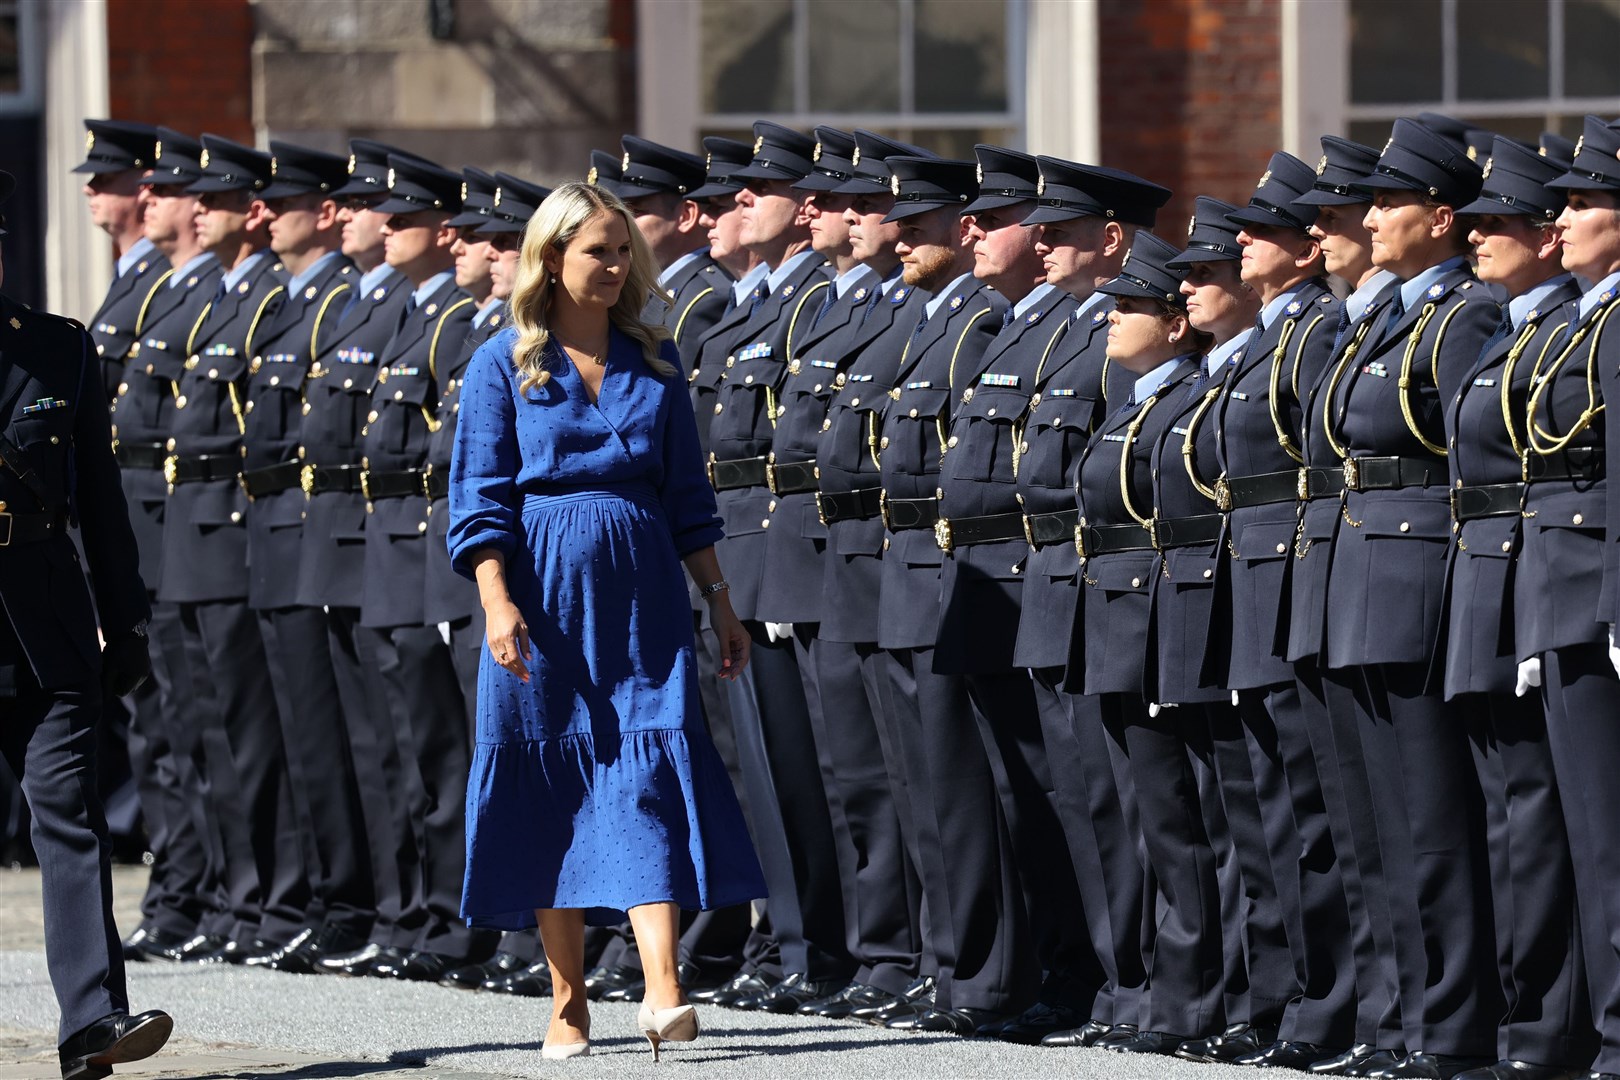 Minister for Justice, Helen McEntee TD inspected the gardai (Nick Bradshaw/PA)